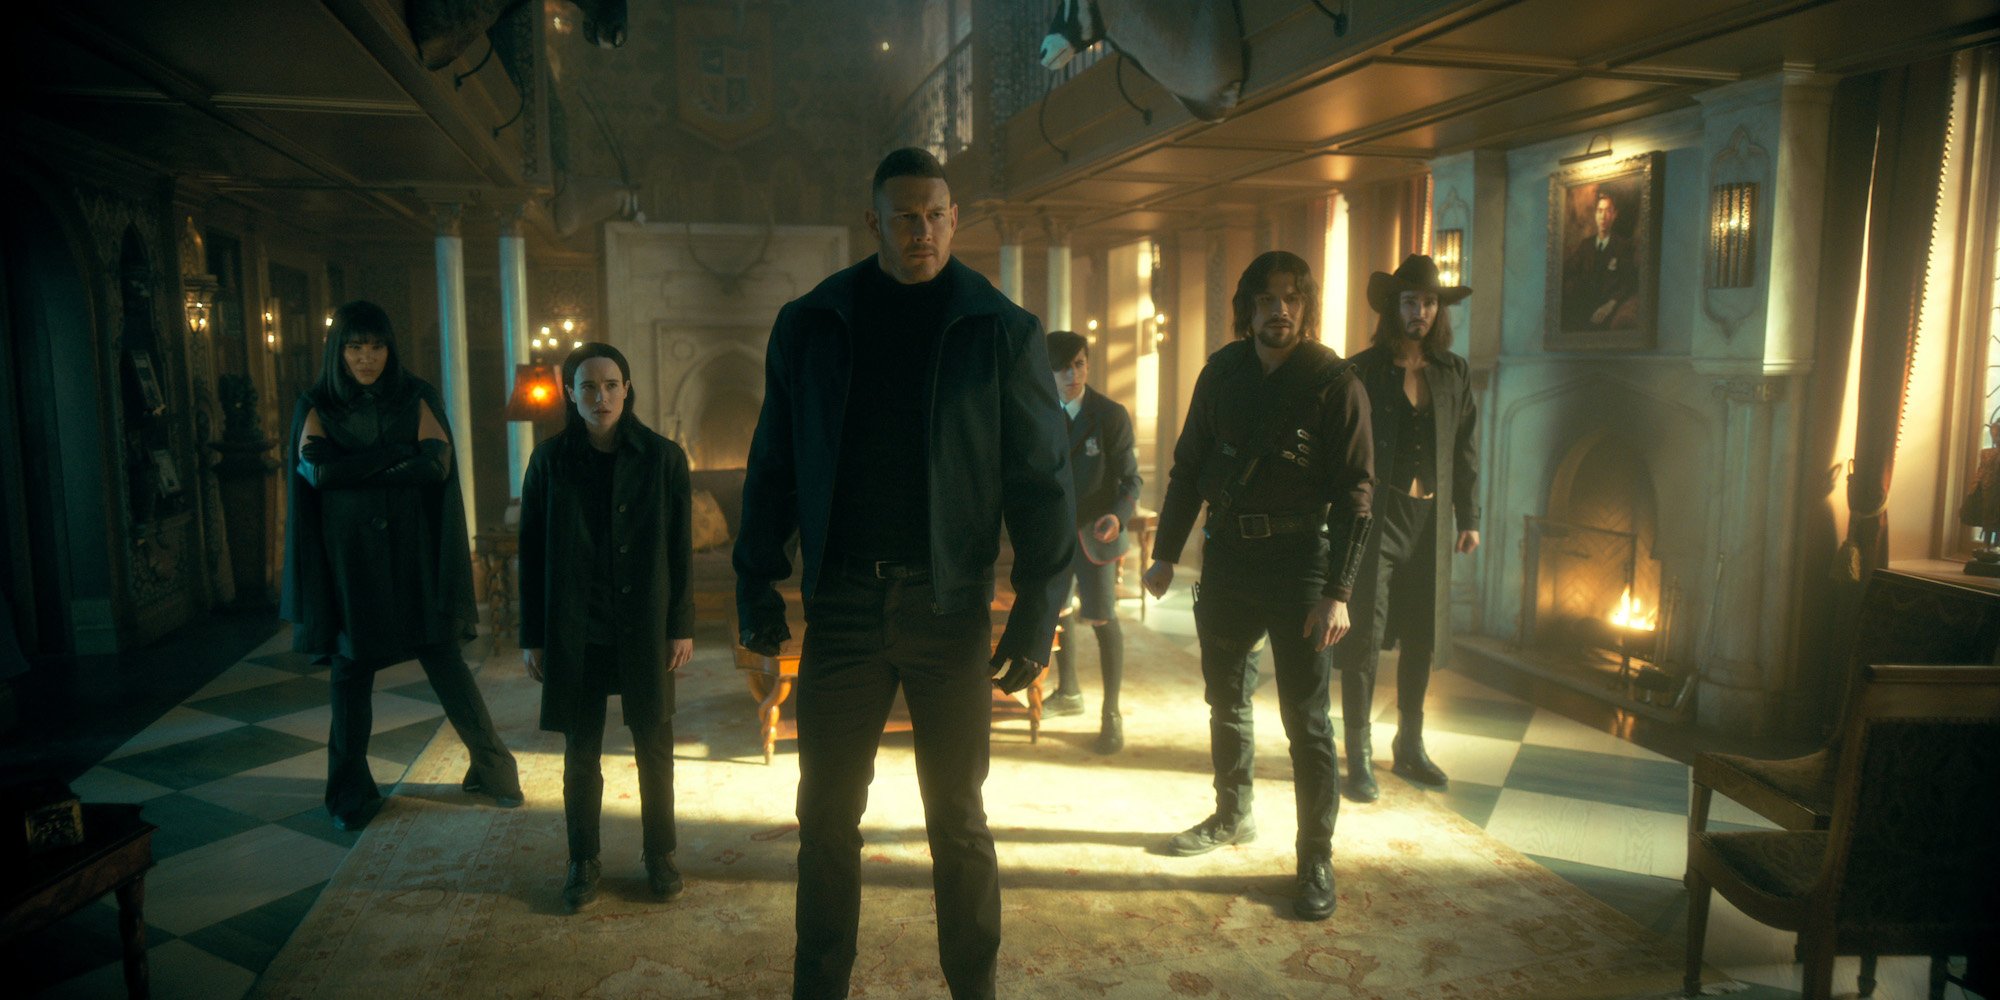 'The Umbrella Academy' Season 3 features the Hargreeves, seen here standing in their childhood home, will face off against The Sparrow Academy in episode 1.